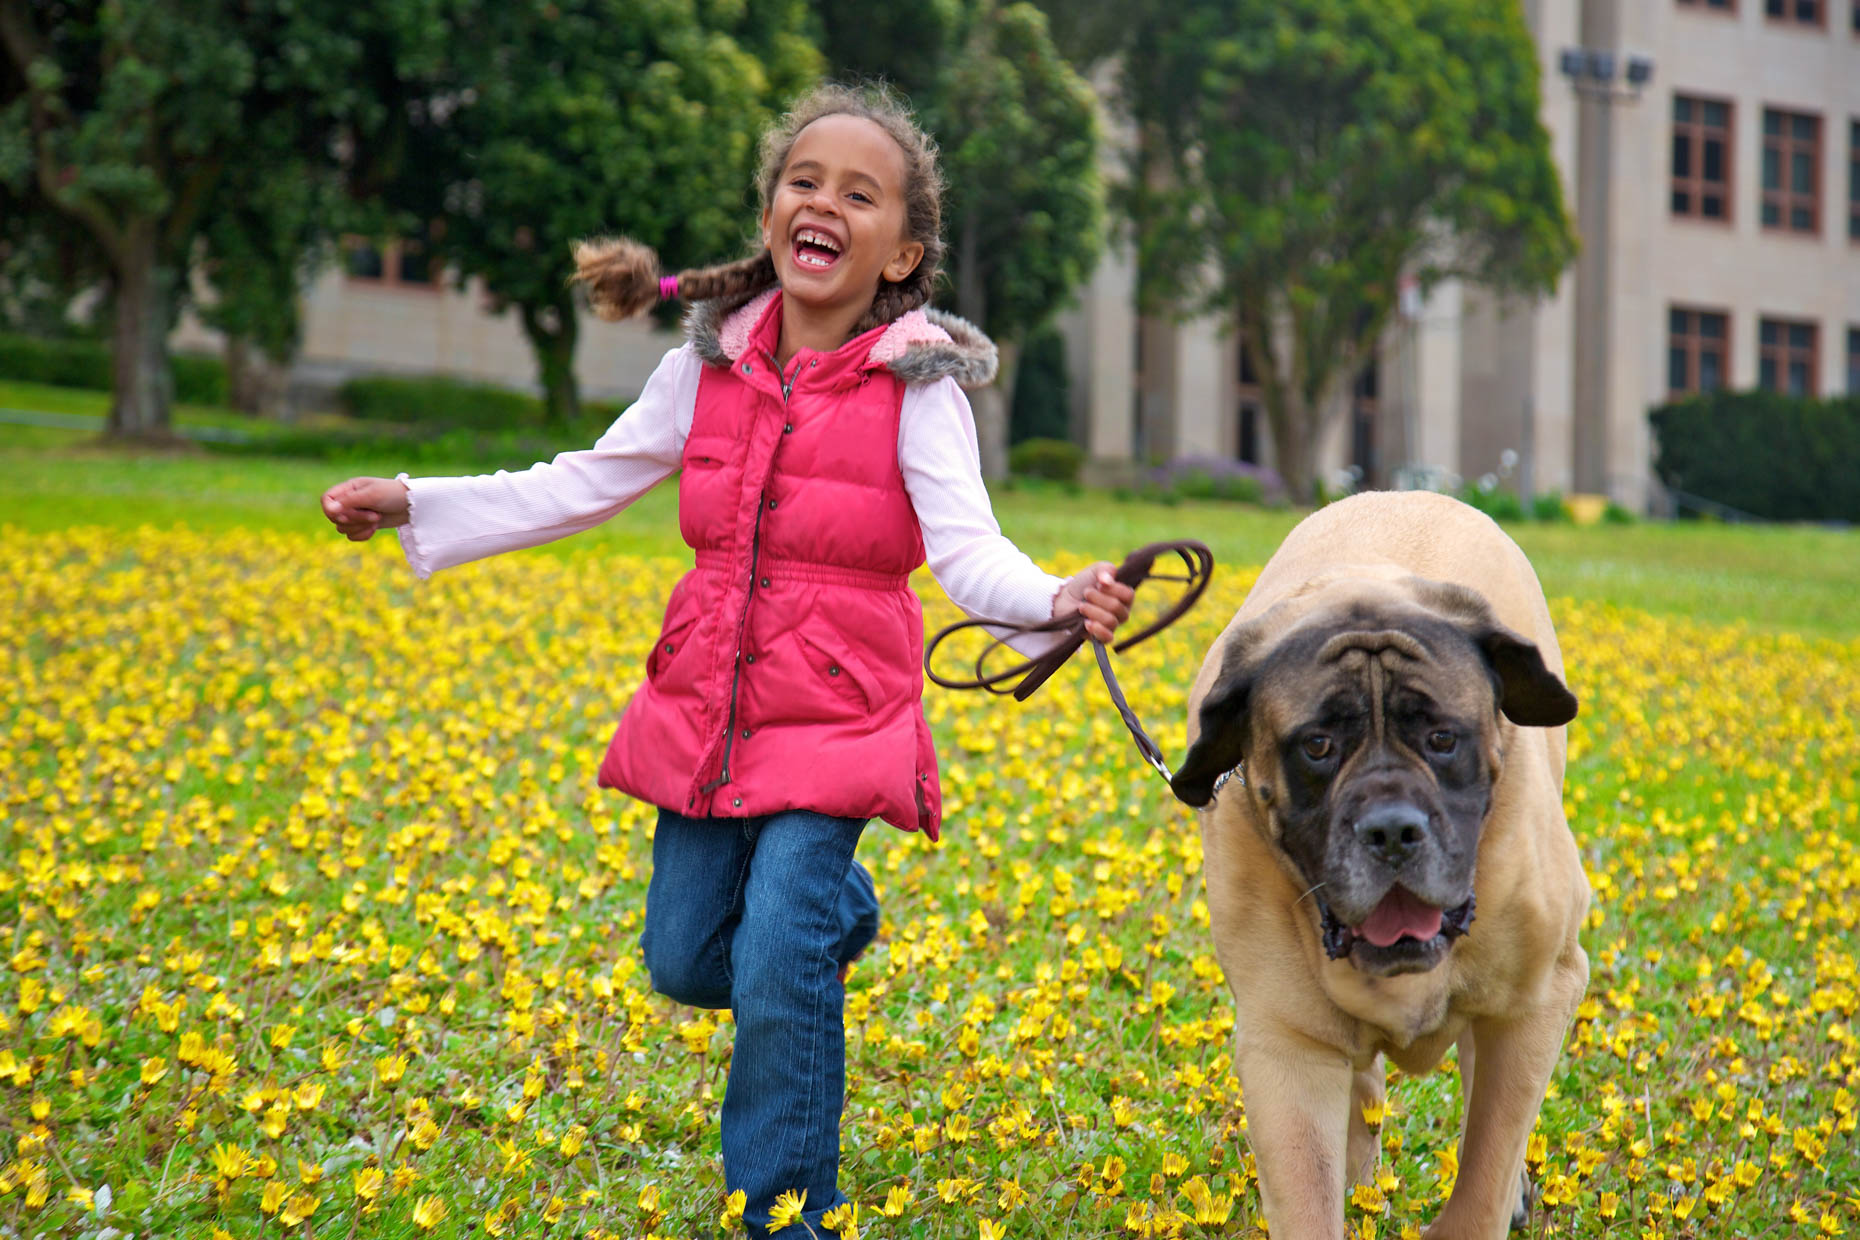 Dog and Pet Photography | Little Girl with Big Dog by Mark Rogers